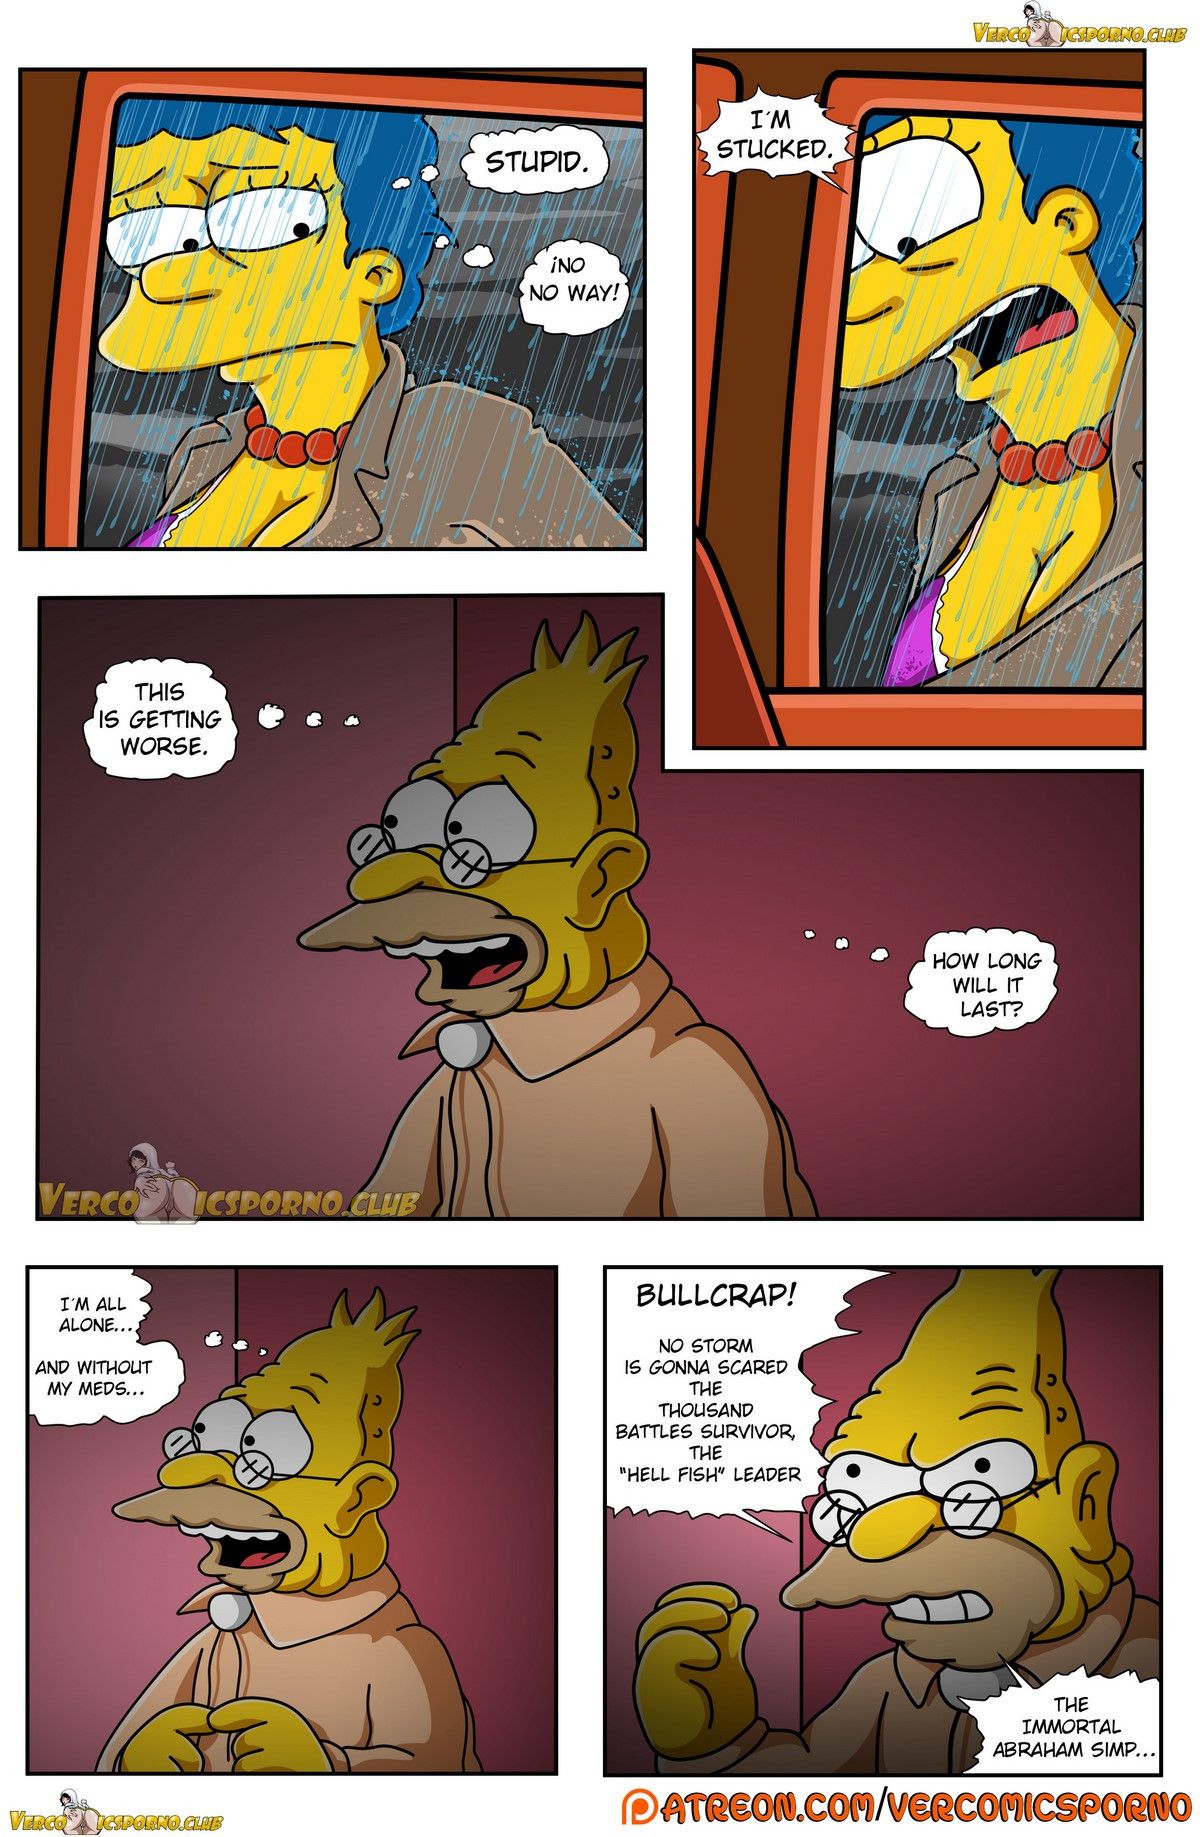 Grandpa and me - [Itooneaxxx] - [Drah Navlag] - [VCP] - [The Simpsons] 17